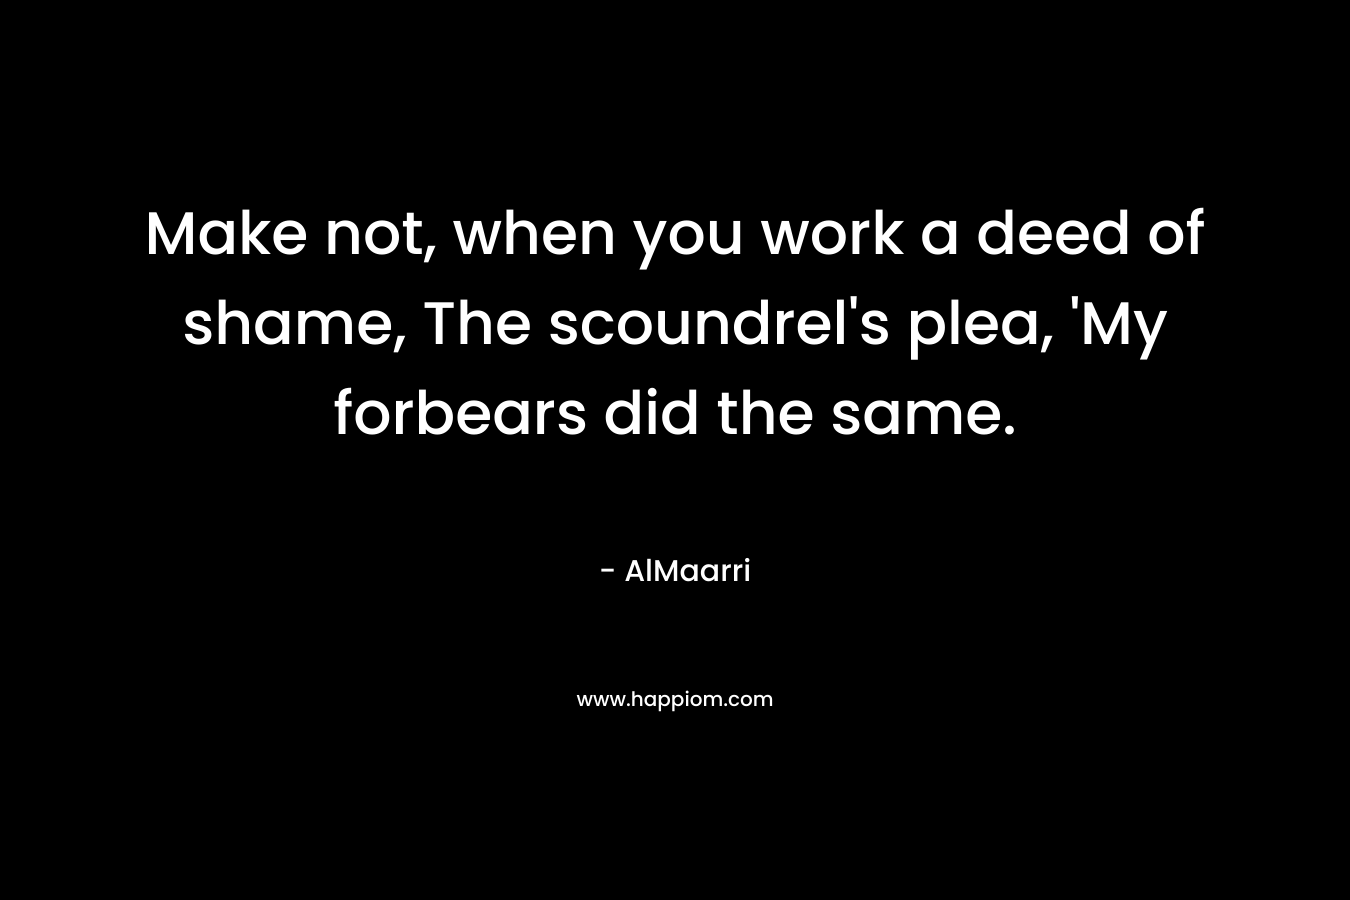 Make not, when you work a deed of shame, The scoundrel’s plea, ‘My forbears did the same. – AlMaarri